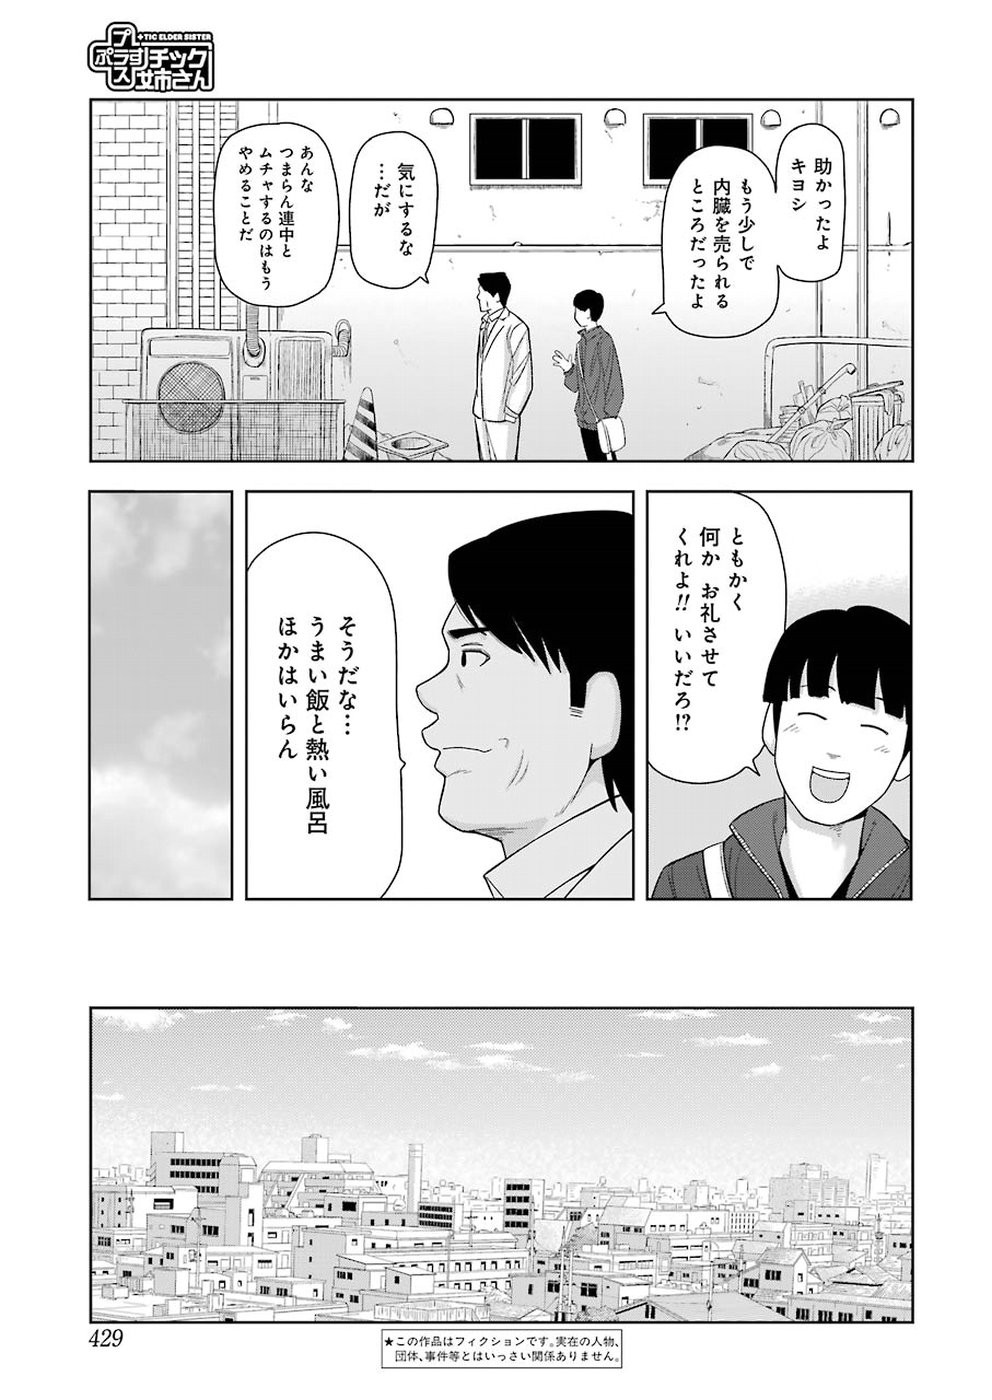 + Tic Nee-san - Chapter 147 - Page 3